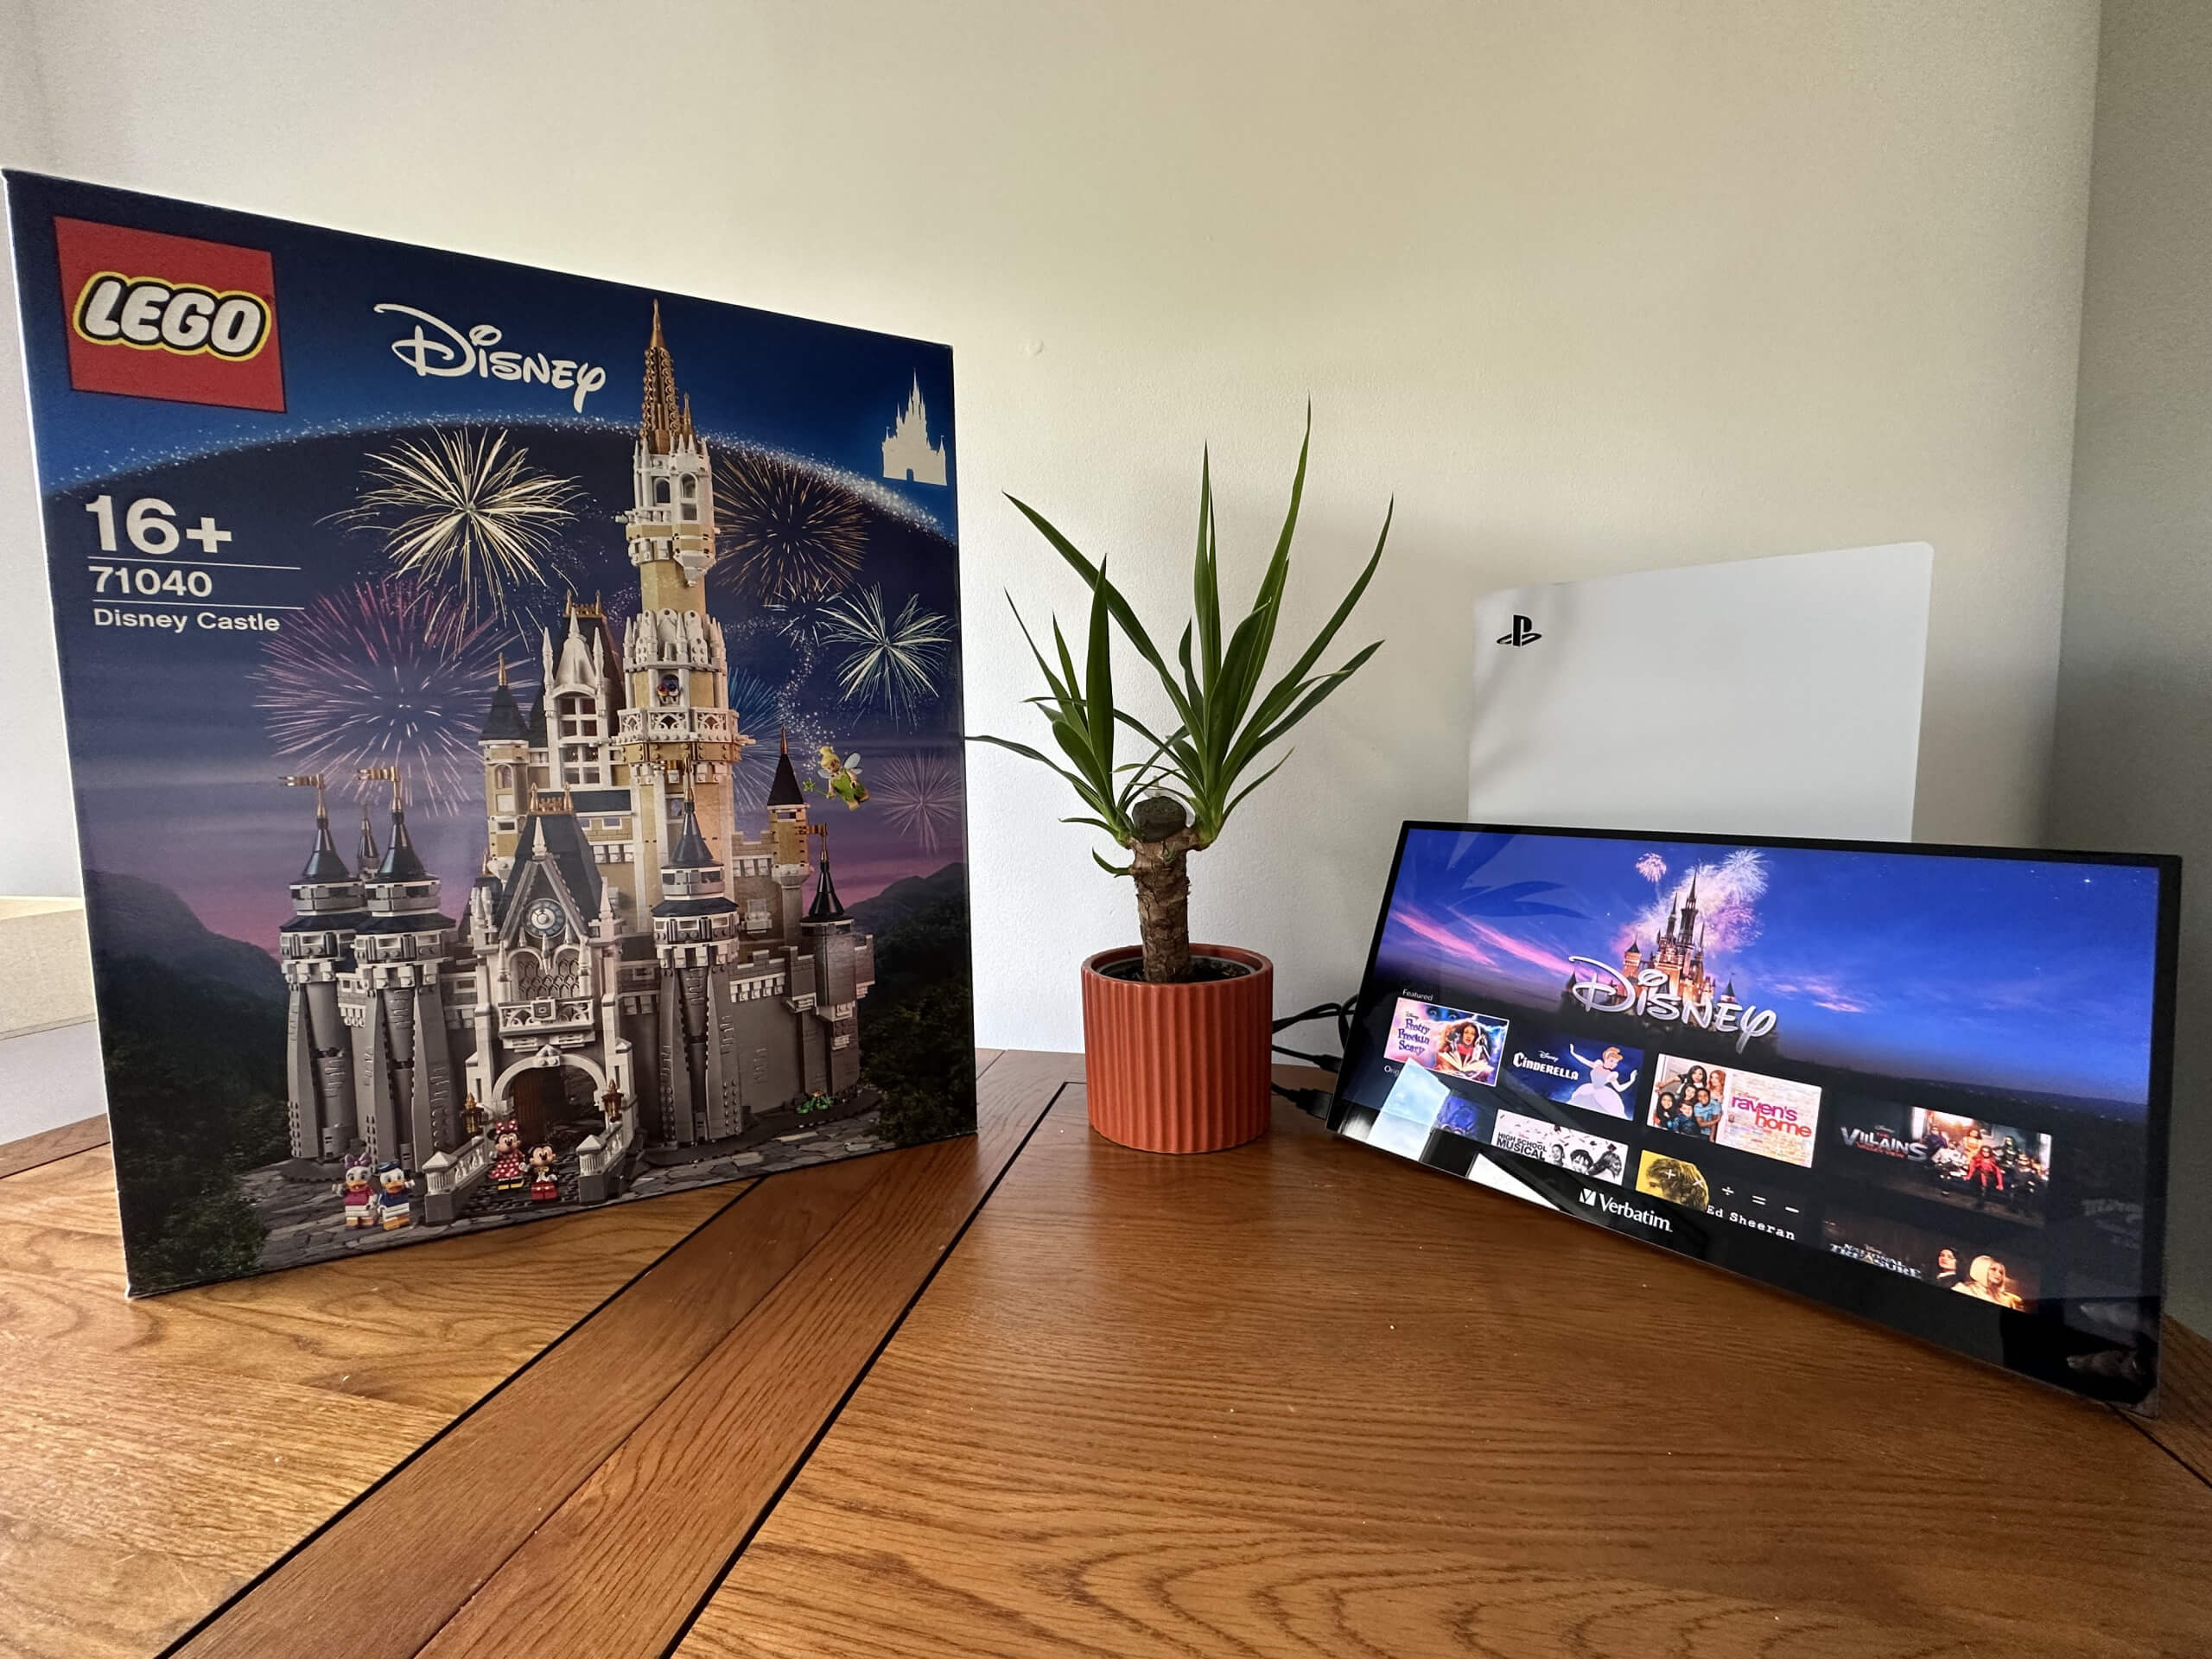 in this image is the verbatim pmt-17 monitor with Disney + on it next to a green plant and the LEGO Disney Castle waiting to be built